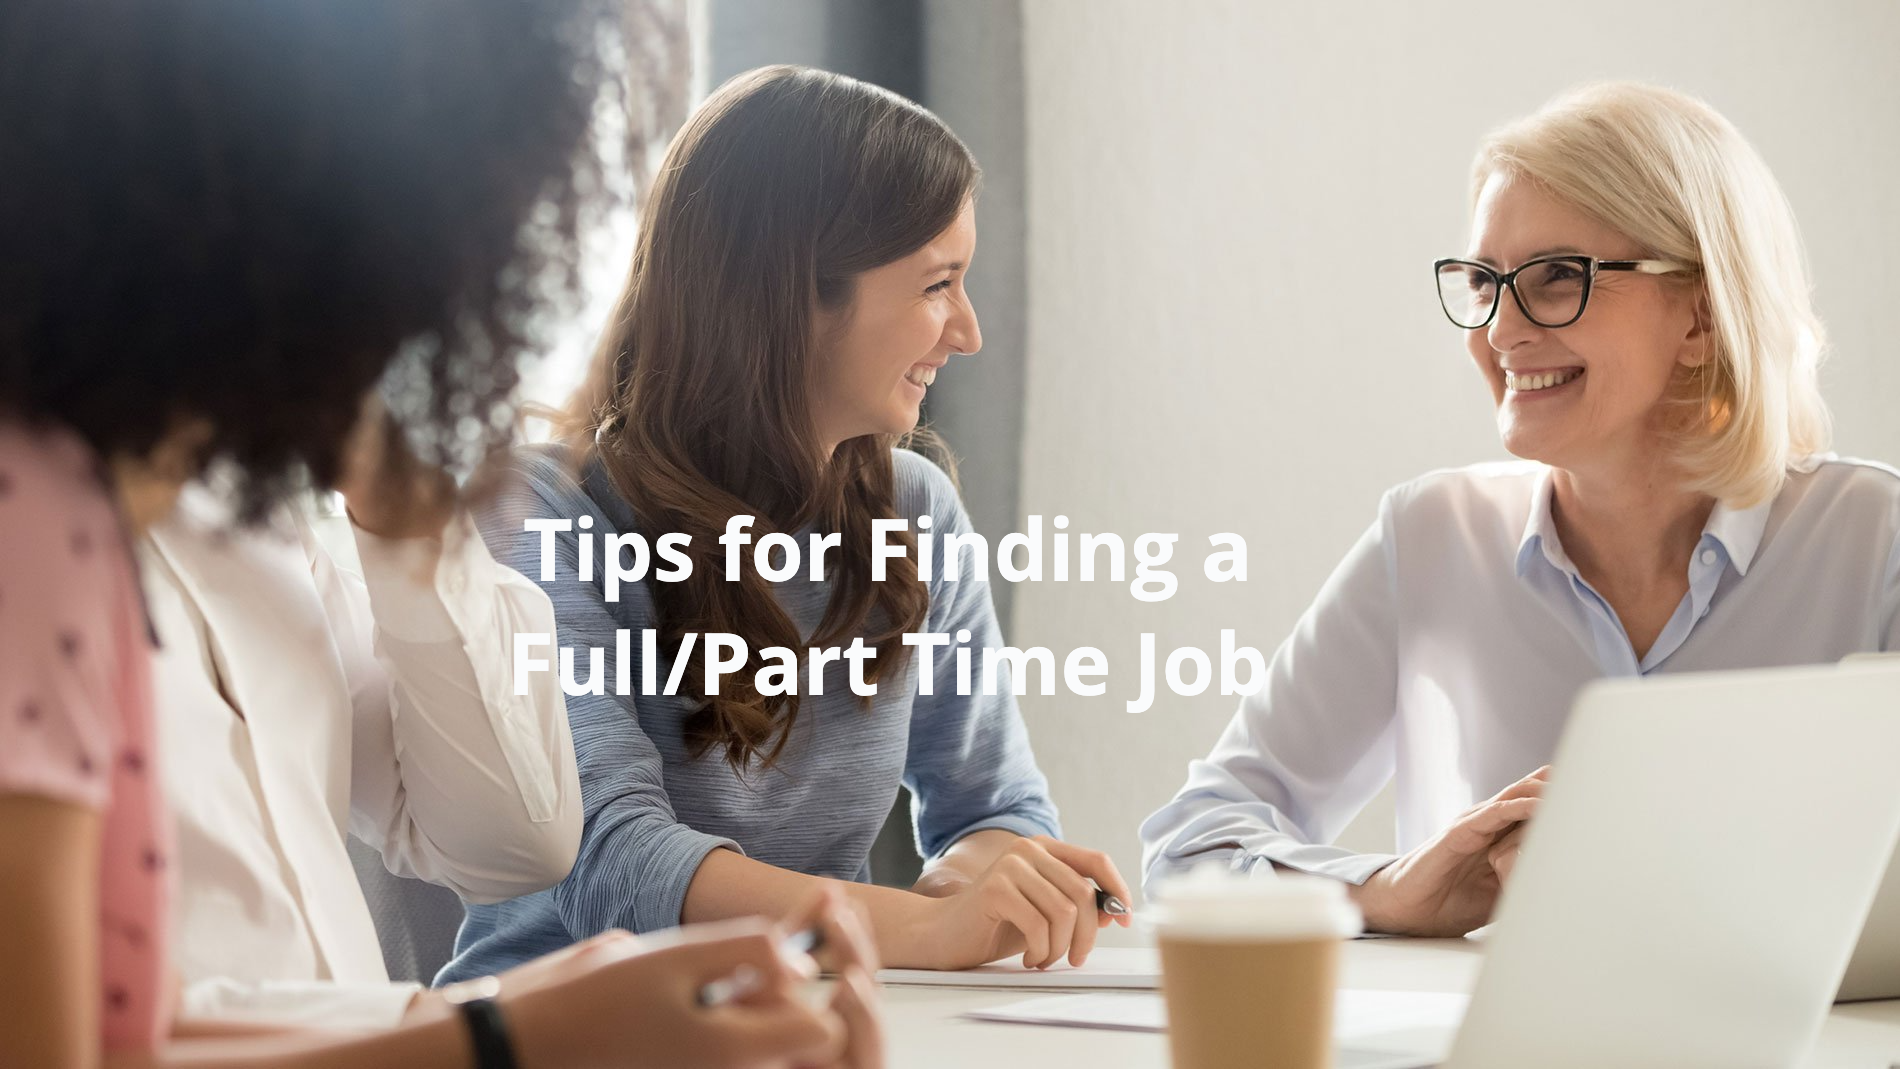 Tips on Finding a Full/Part-Time Job